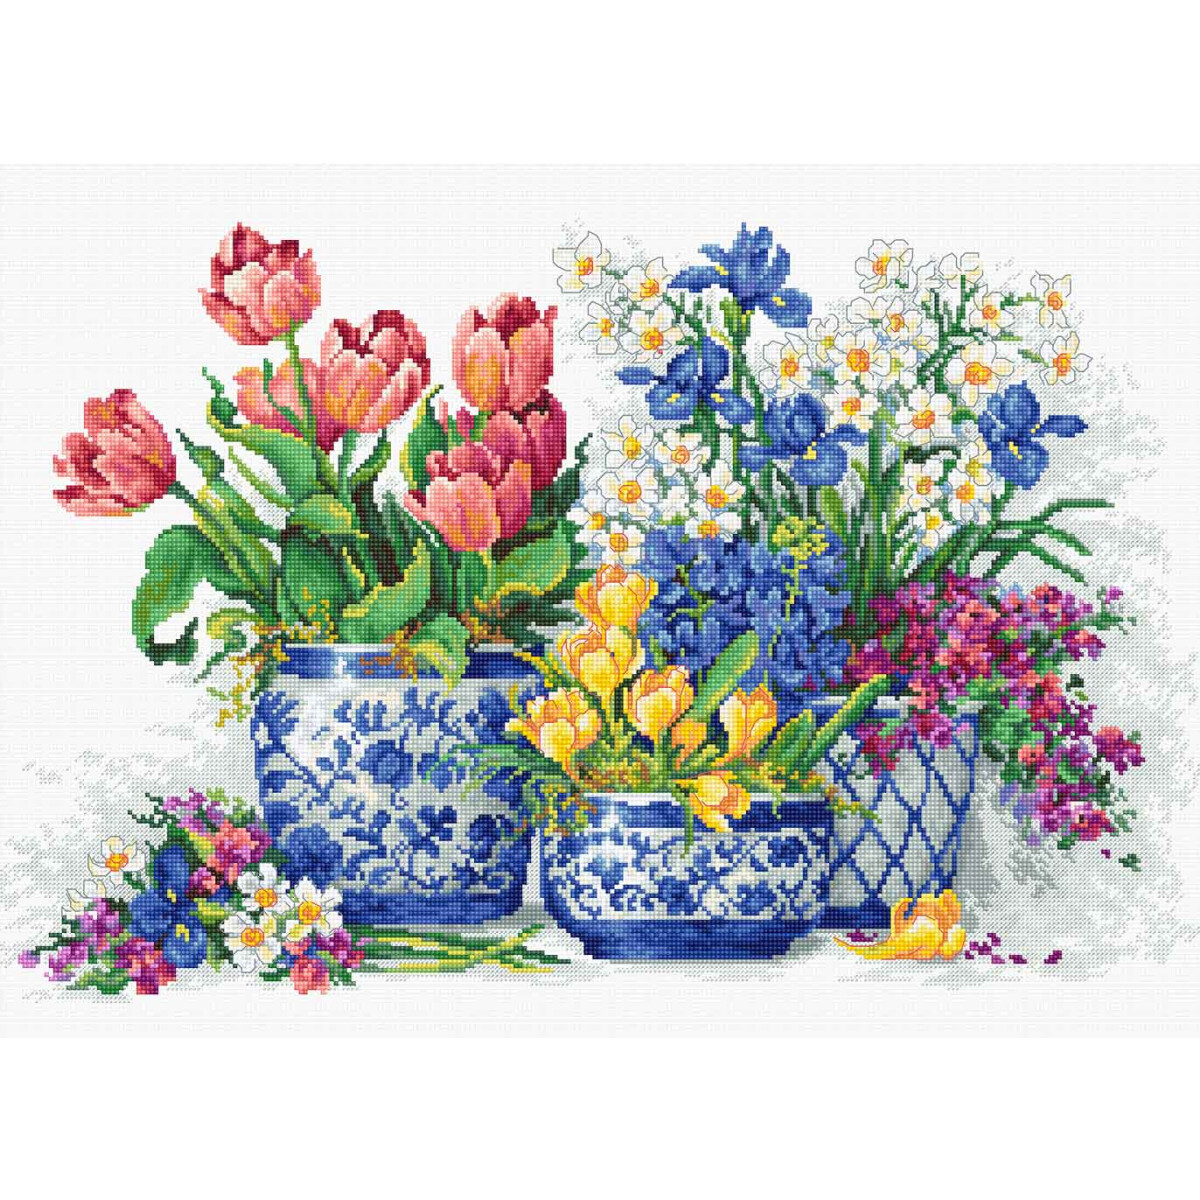 A colorful collection of flowers in blue and white vases....